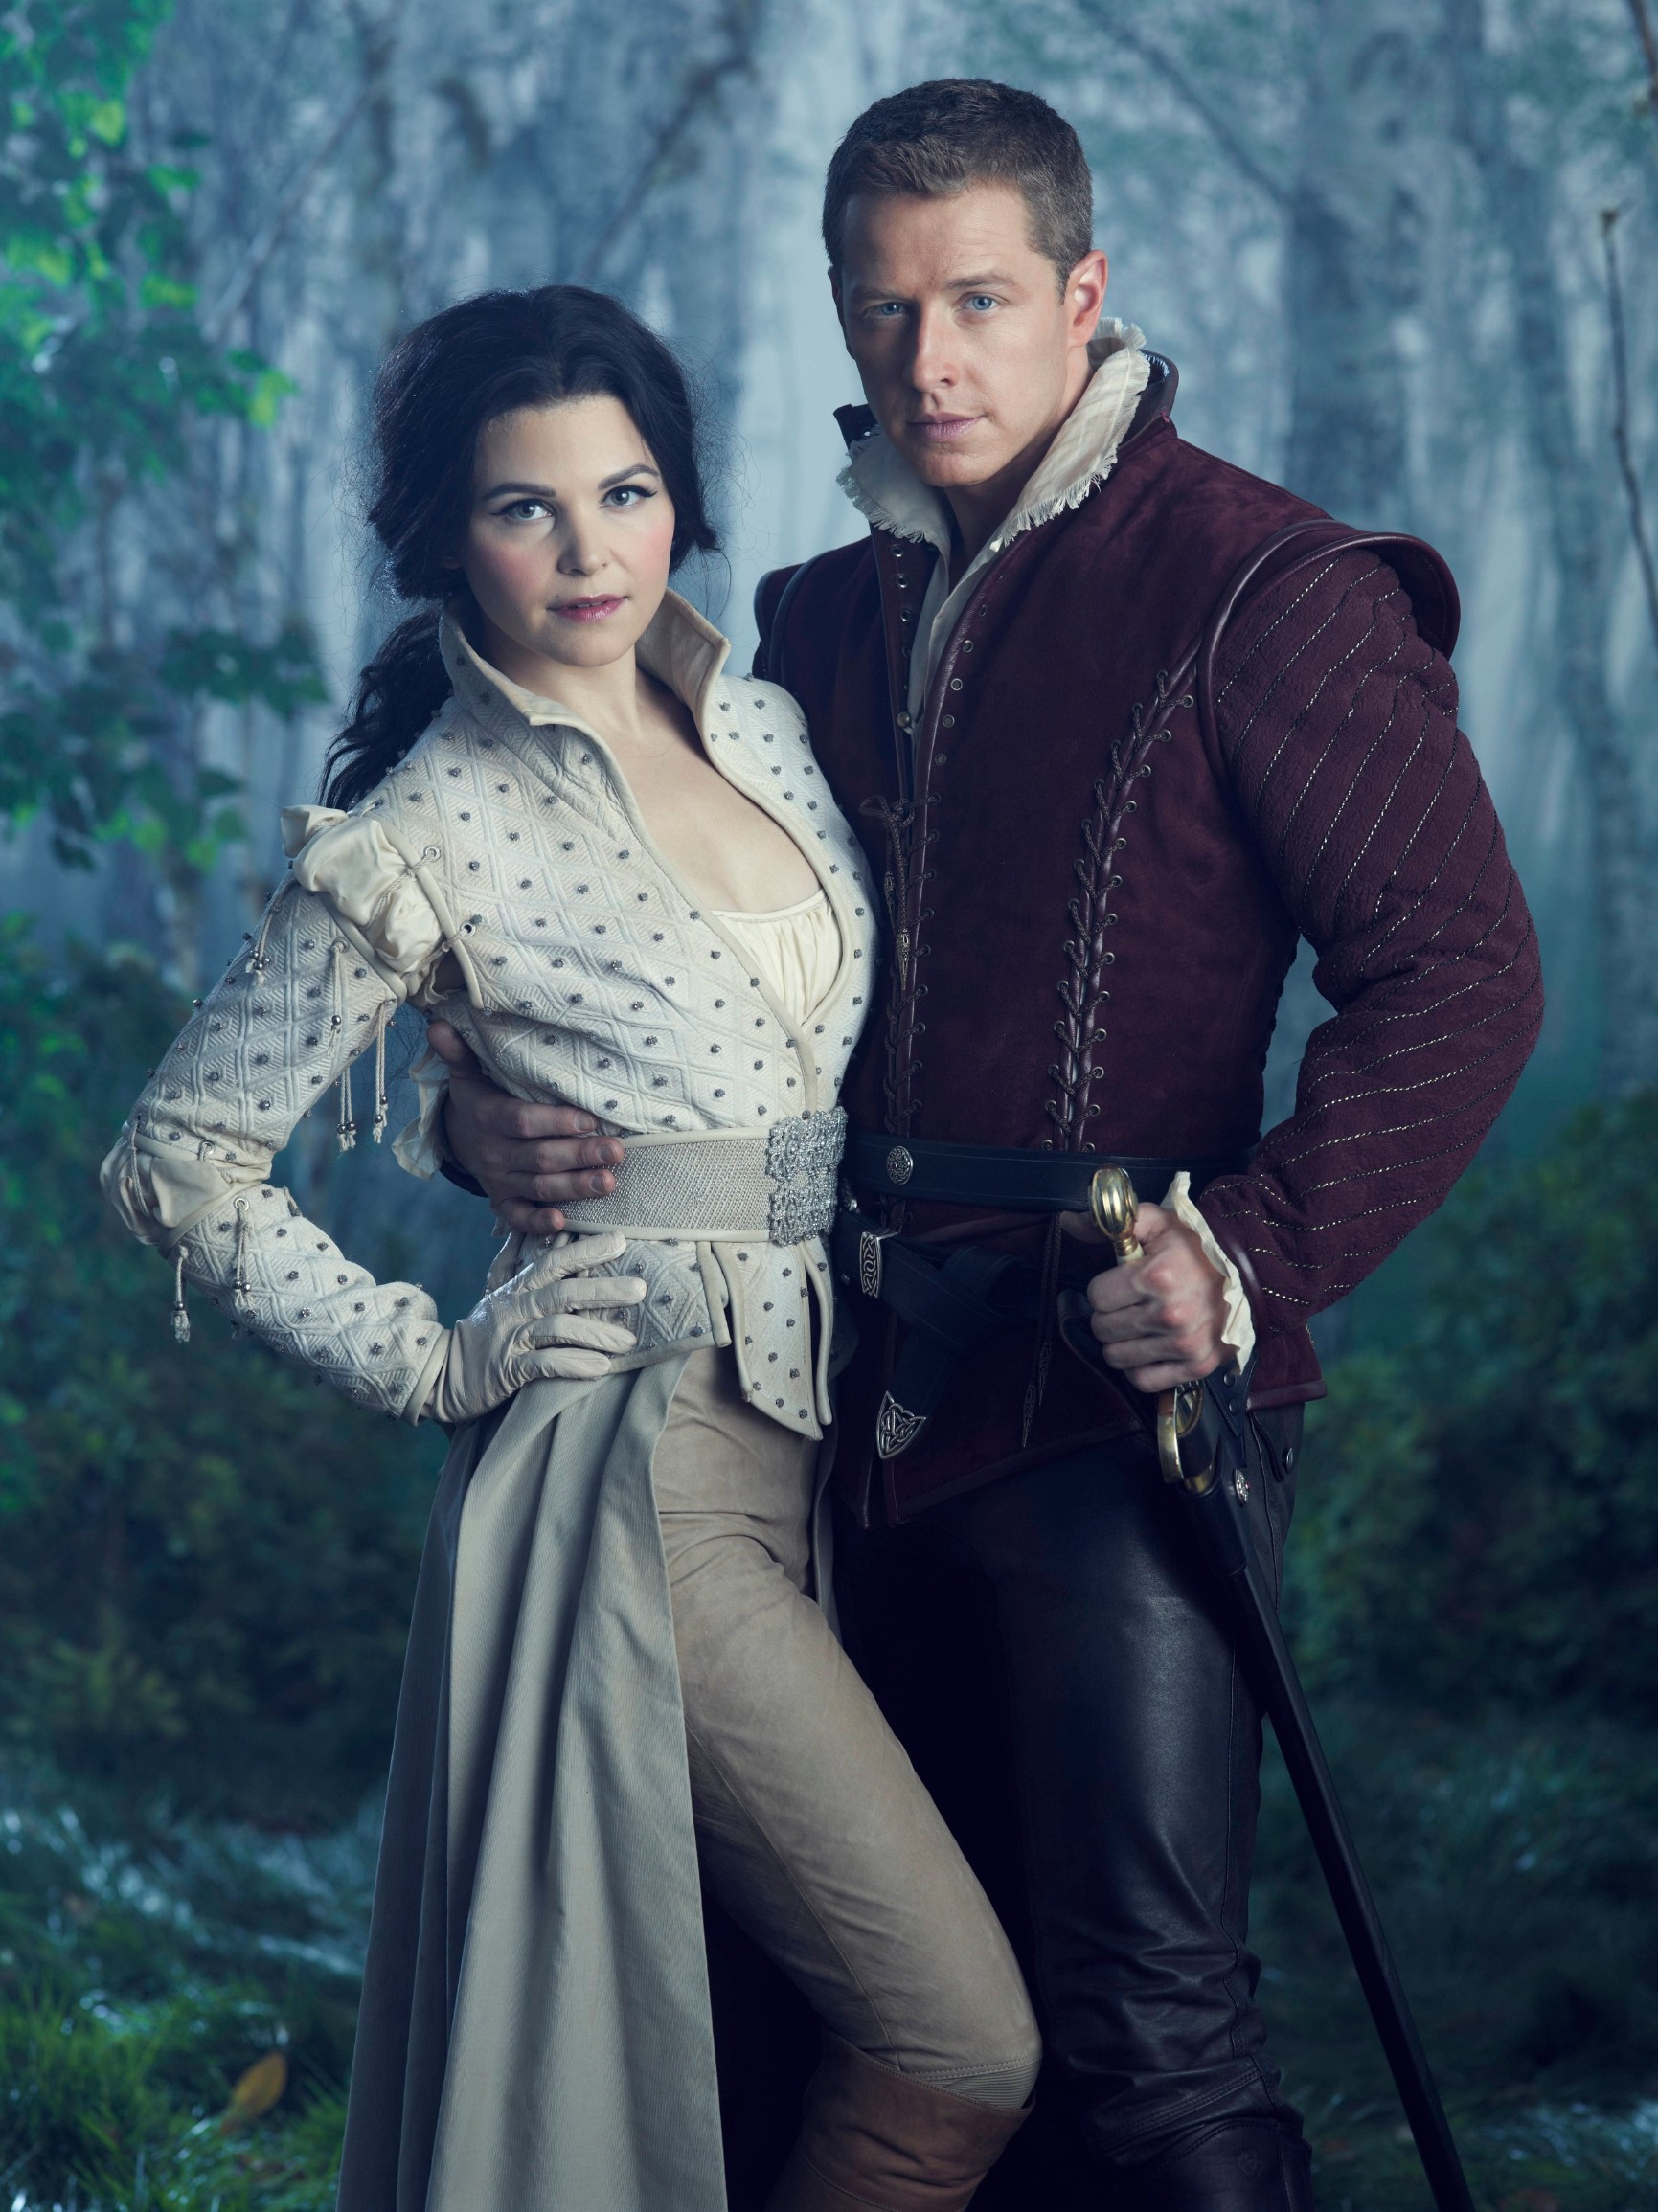 ONCE UPON A TIME (2011) - GINNIFER GOODWIN - JOSH DALLAS., Image: 189501309, License: Rights-managed, Restrictions: Editorial use only. No merchandising or book covers. This is a publicly distributed handout. Access rights only, no license of copyright provided., Model Release: no, Credit line: ABC STUDIOS - Album / Album / Profimedia